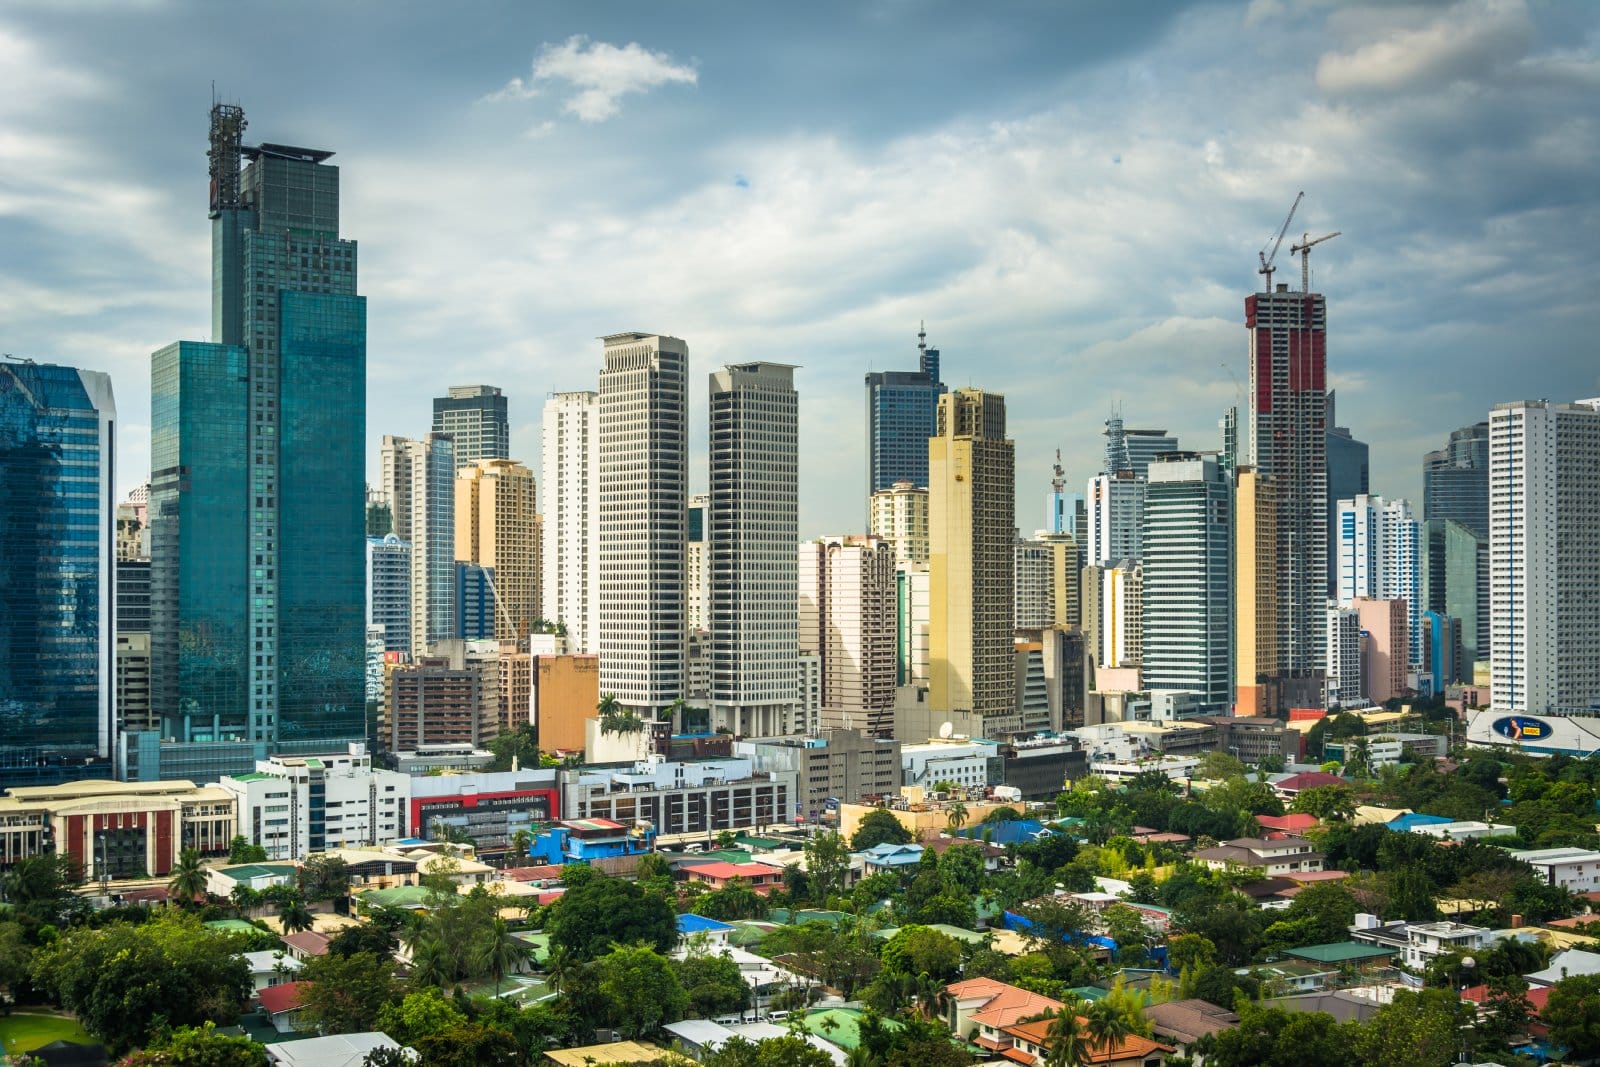 <p class="wp-caption-text">Image Credit: Shutterstock / Jon Bilous</p>  <p><span>Your day in Manila is a journey through time, from the historic walls of Intramuros to the modern expanse of the Mall of Asia. It showcases the city’s ability to preserve its heritage while embracing progress. As you explore, remember to stay hydrated, respect local customs, and plan your transportation wisely to navigate the city’s bustling streets efficiently.</span></p>